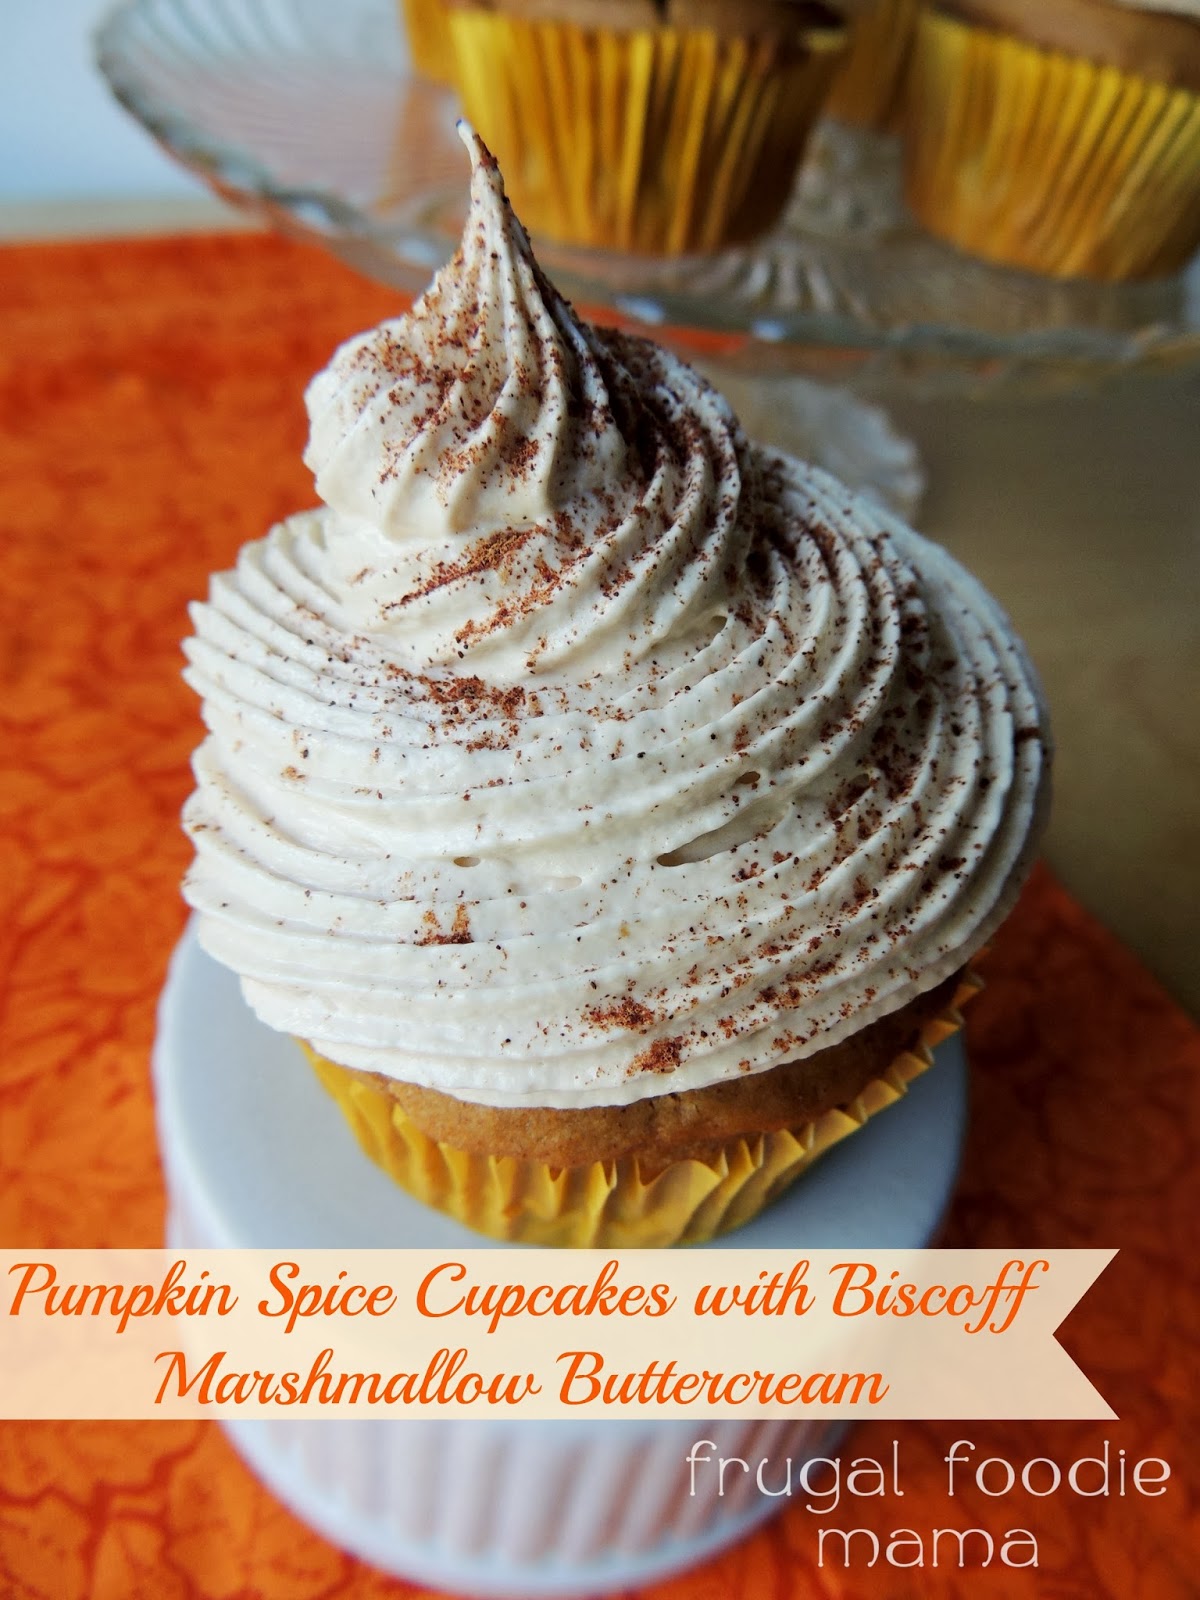 Frugal Foodie Mama: Pumpkin Spice Cupcakes with Biscoff Marshmallow